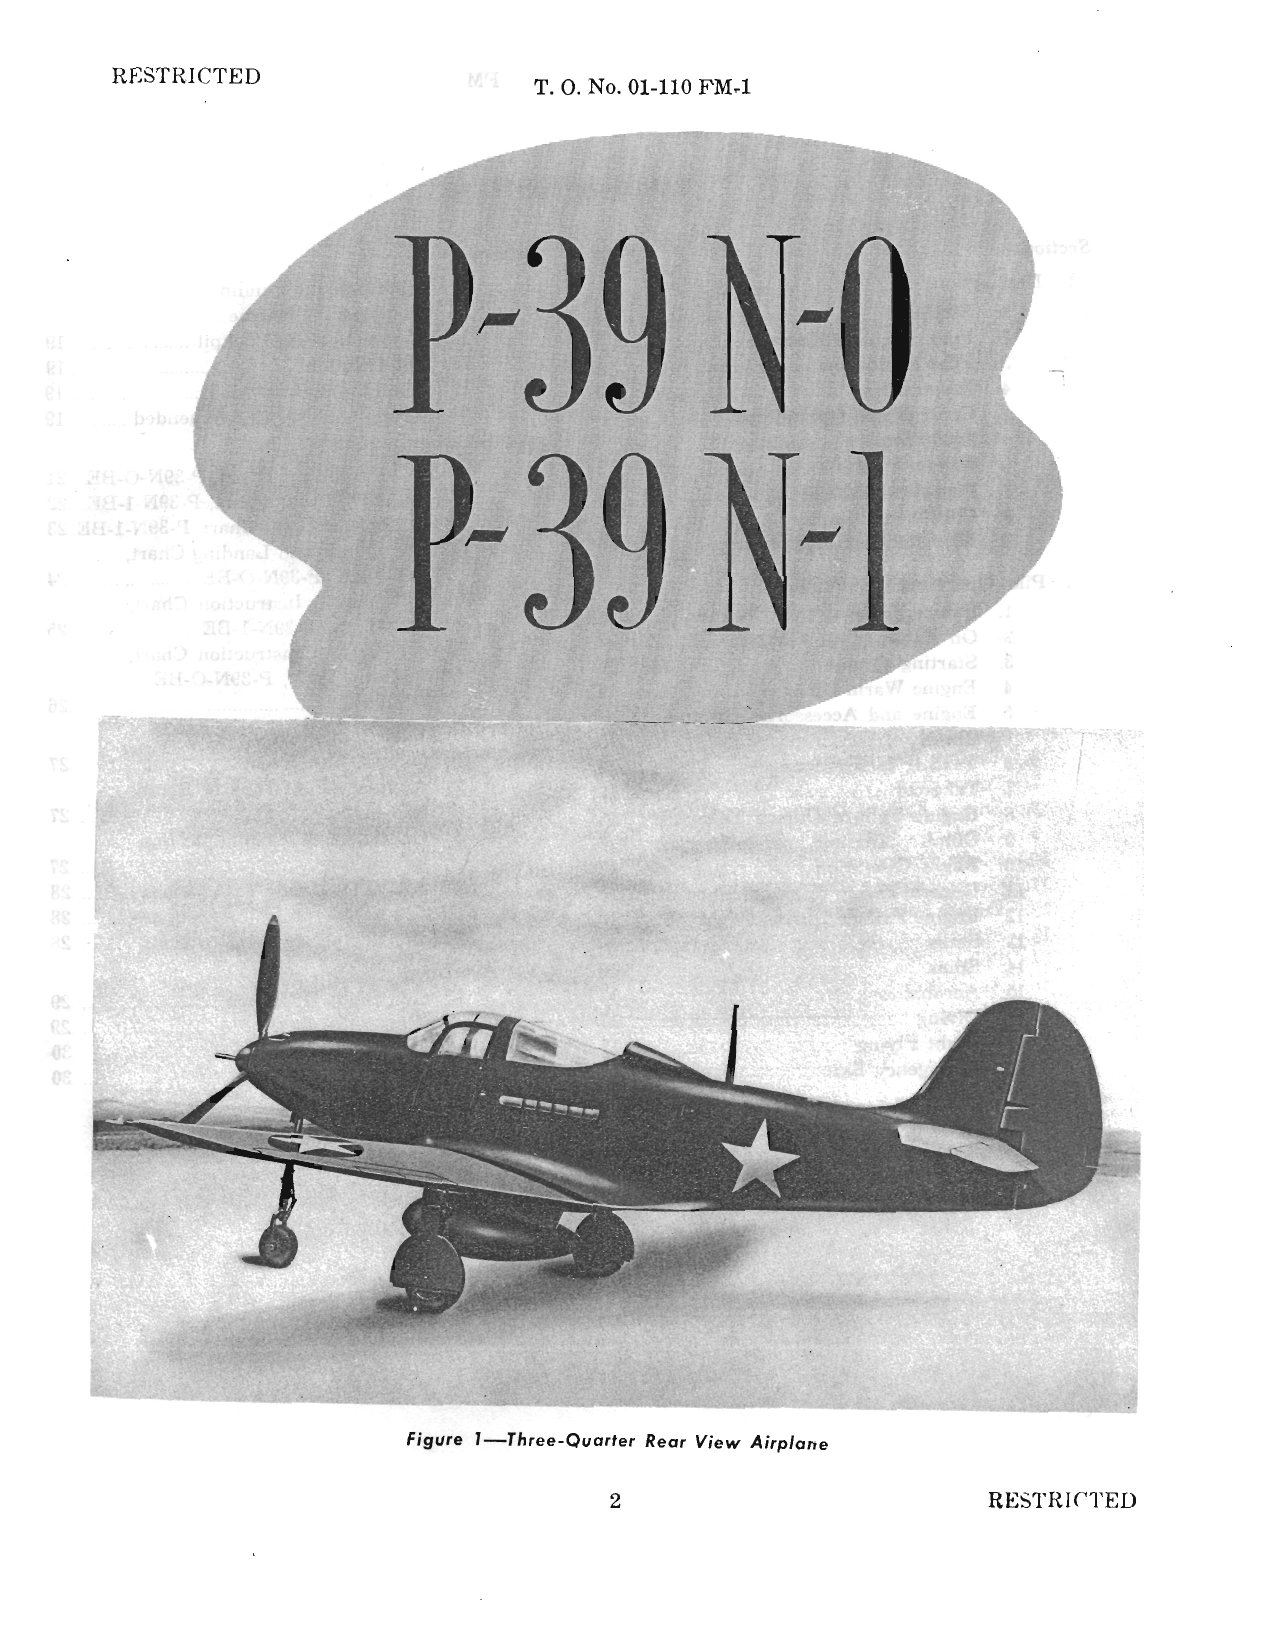 Sample page 4 from AirCorps Library document: Pilot's Flight Operating Instructions for P-39N-O and P-39N-1